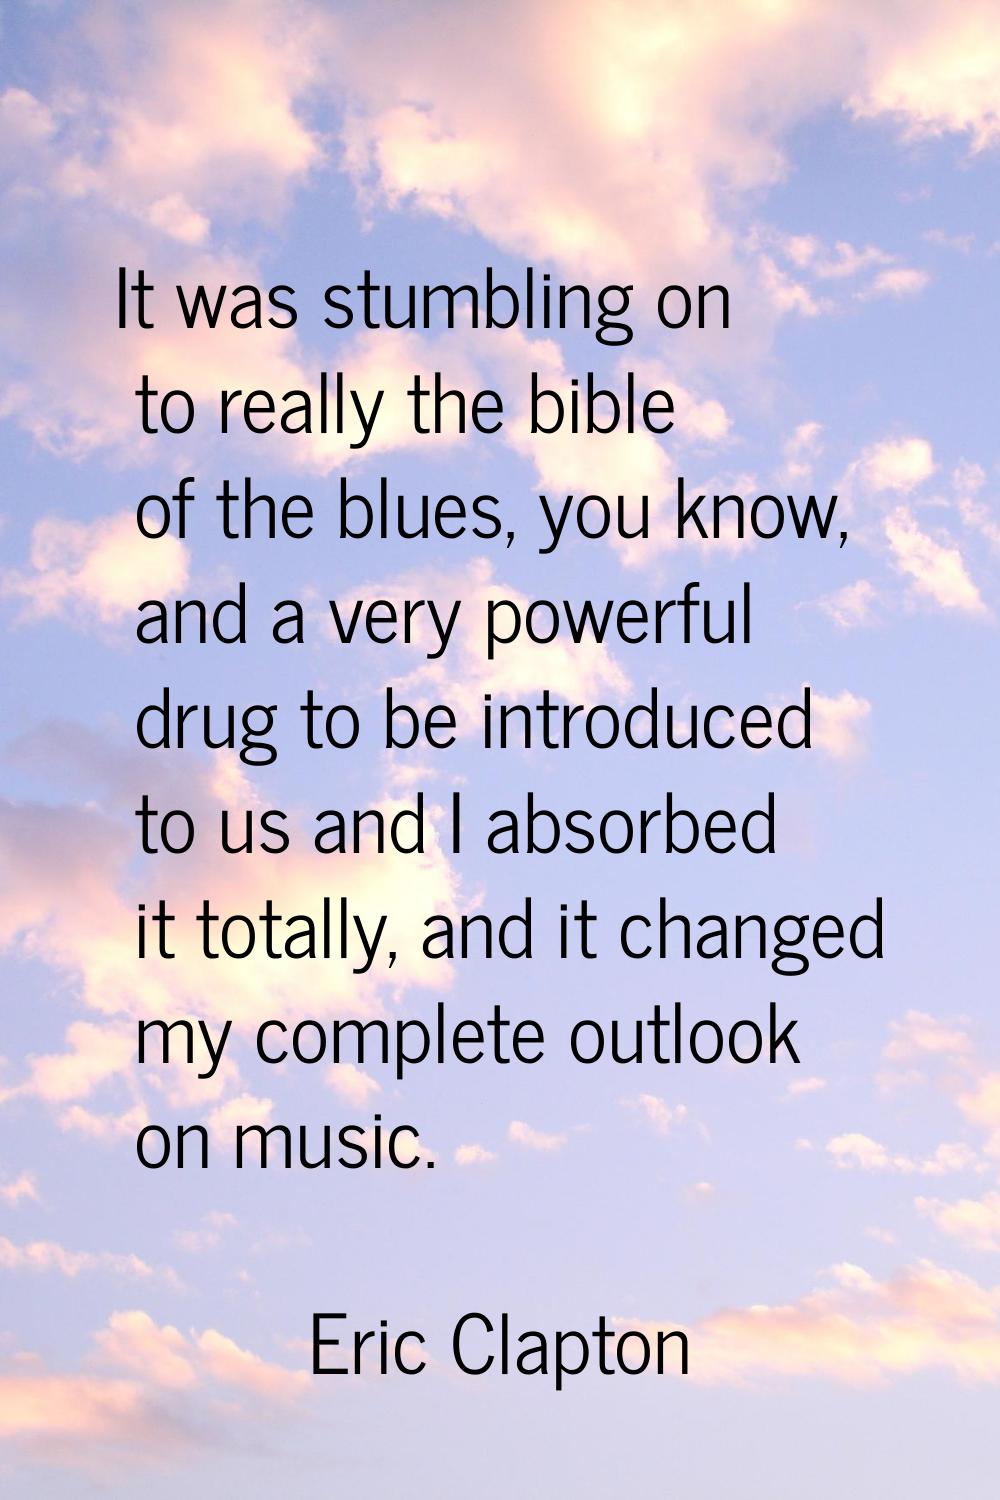 It was stumbling on to really the bible of the blues, you know, and a very powerful drug to be intr